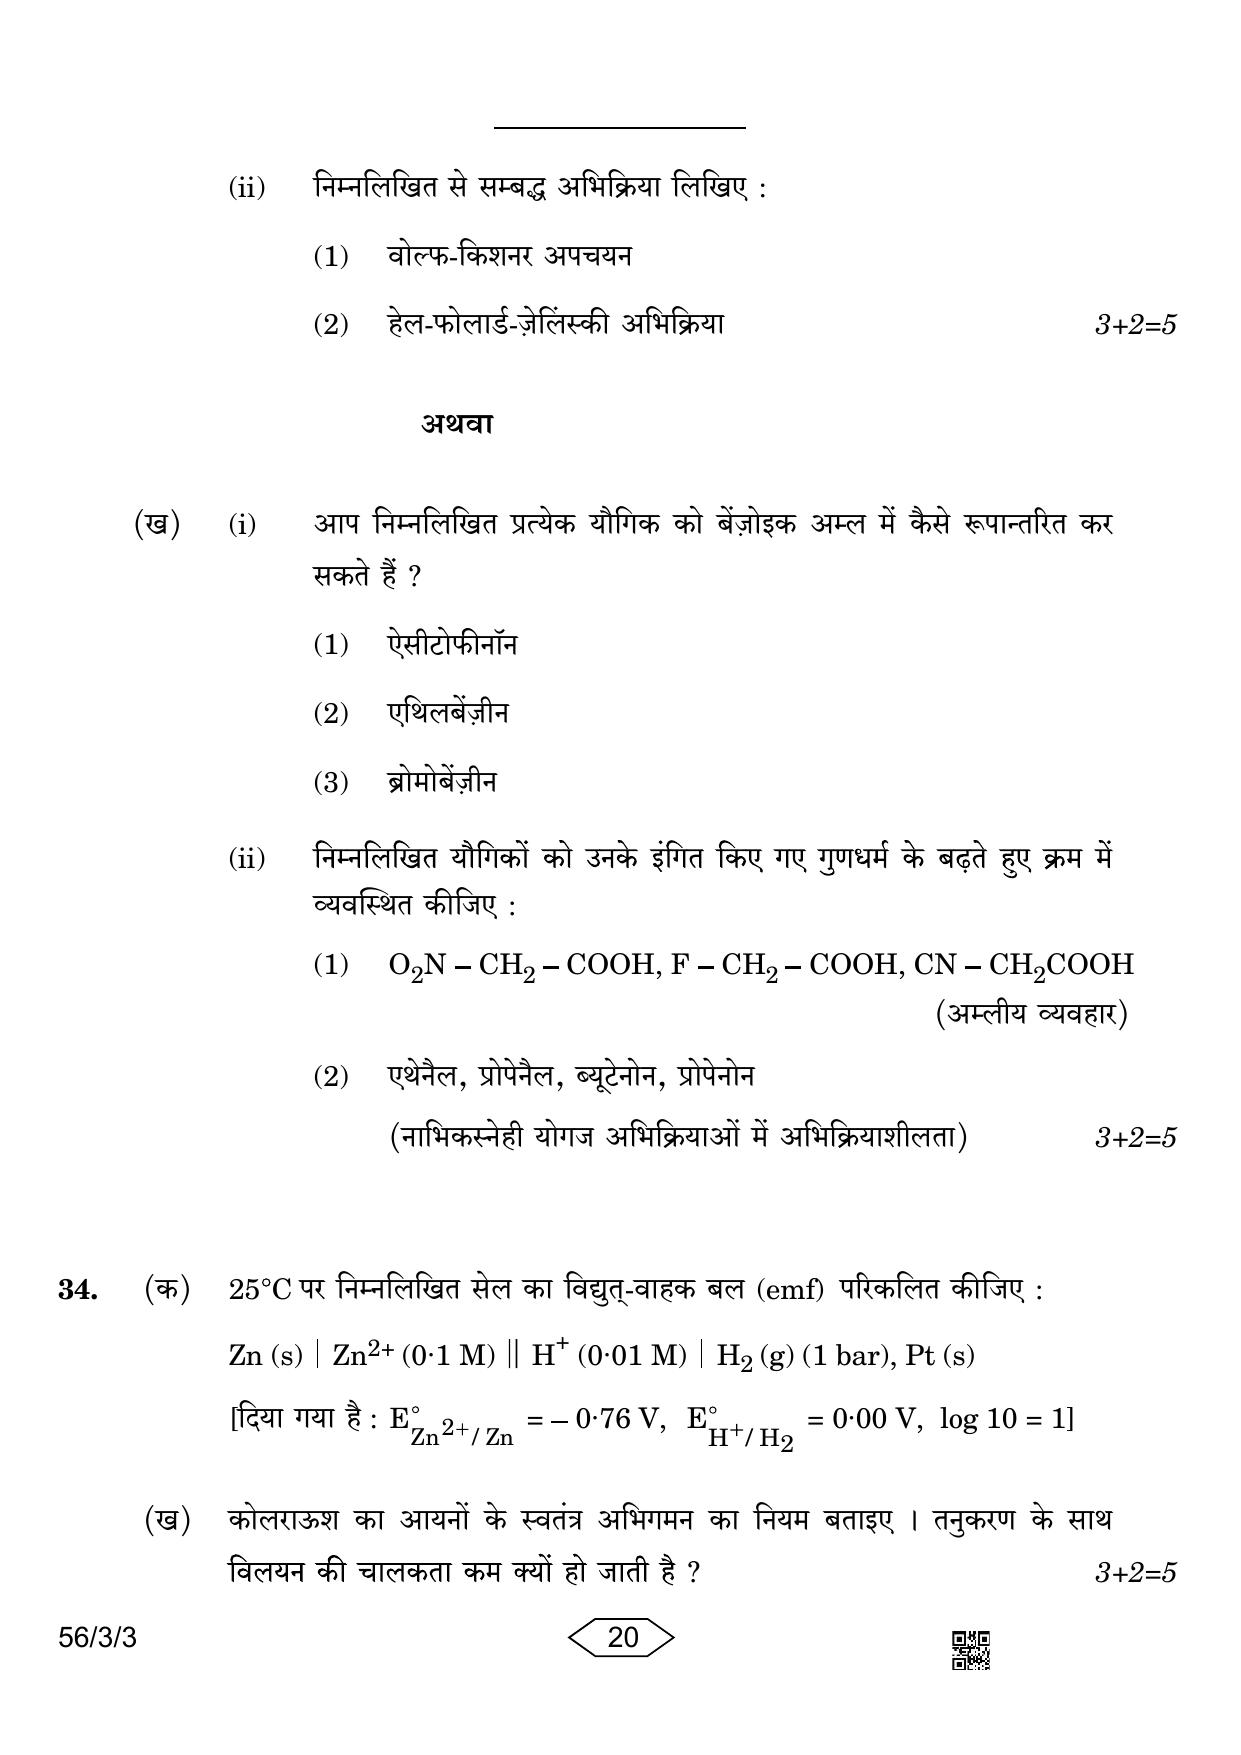 CBSE Class 12 56-3-3 Chemistry 2023 Question Paper - Page 20